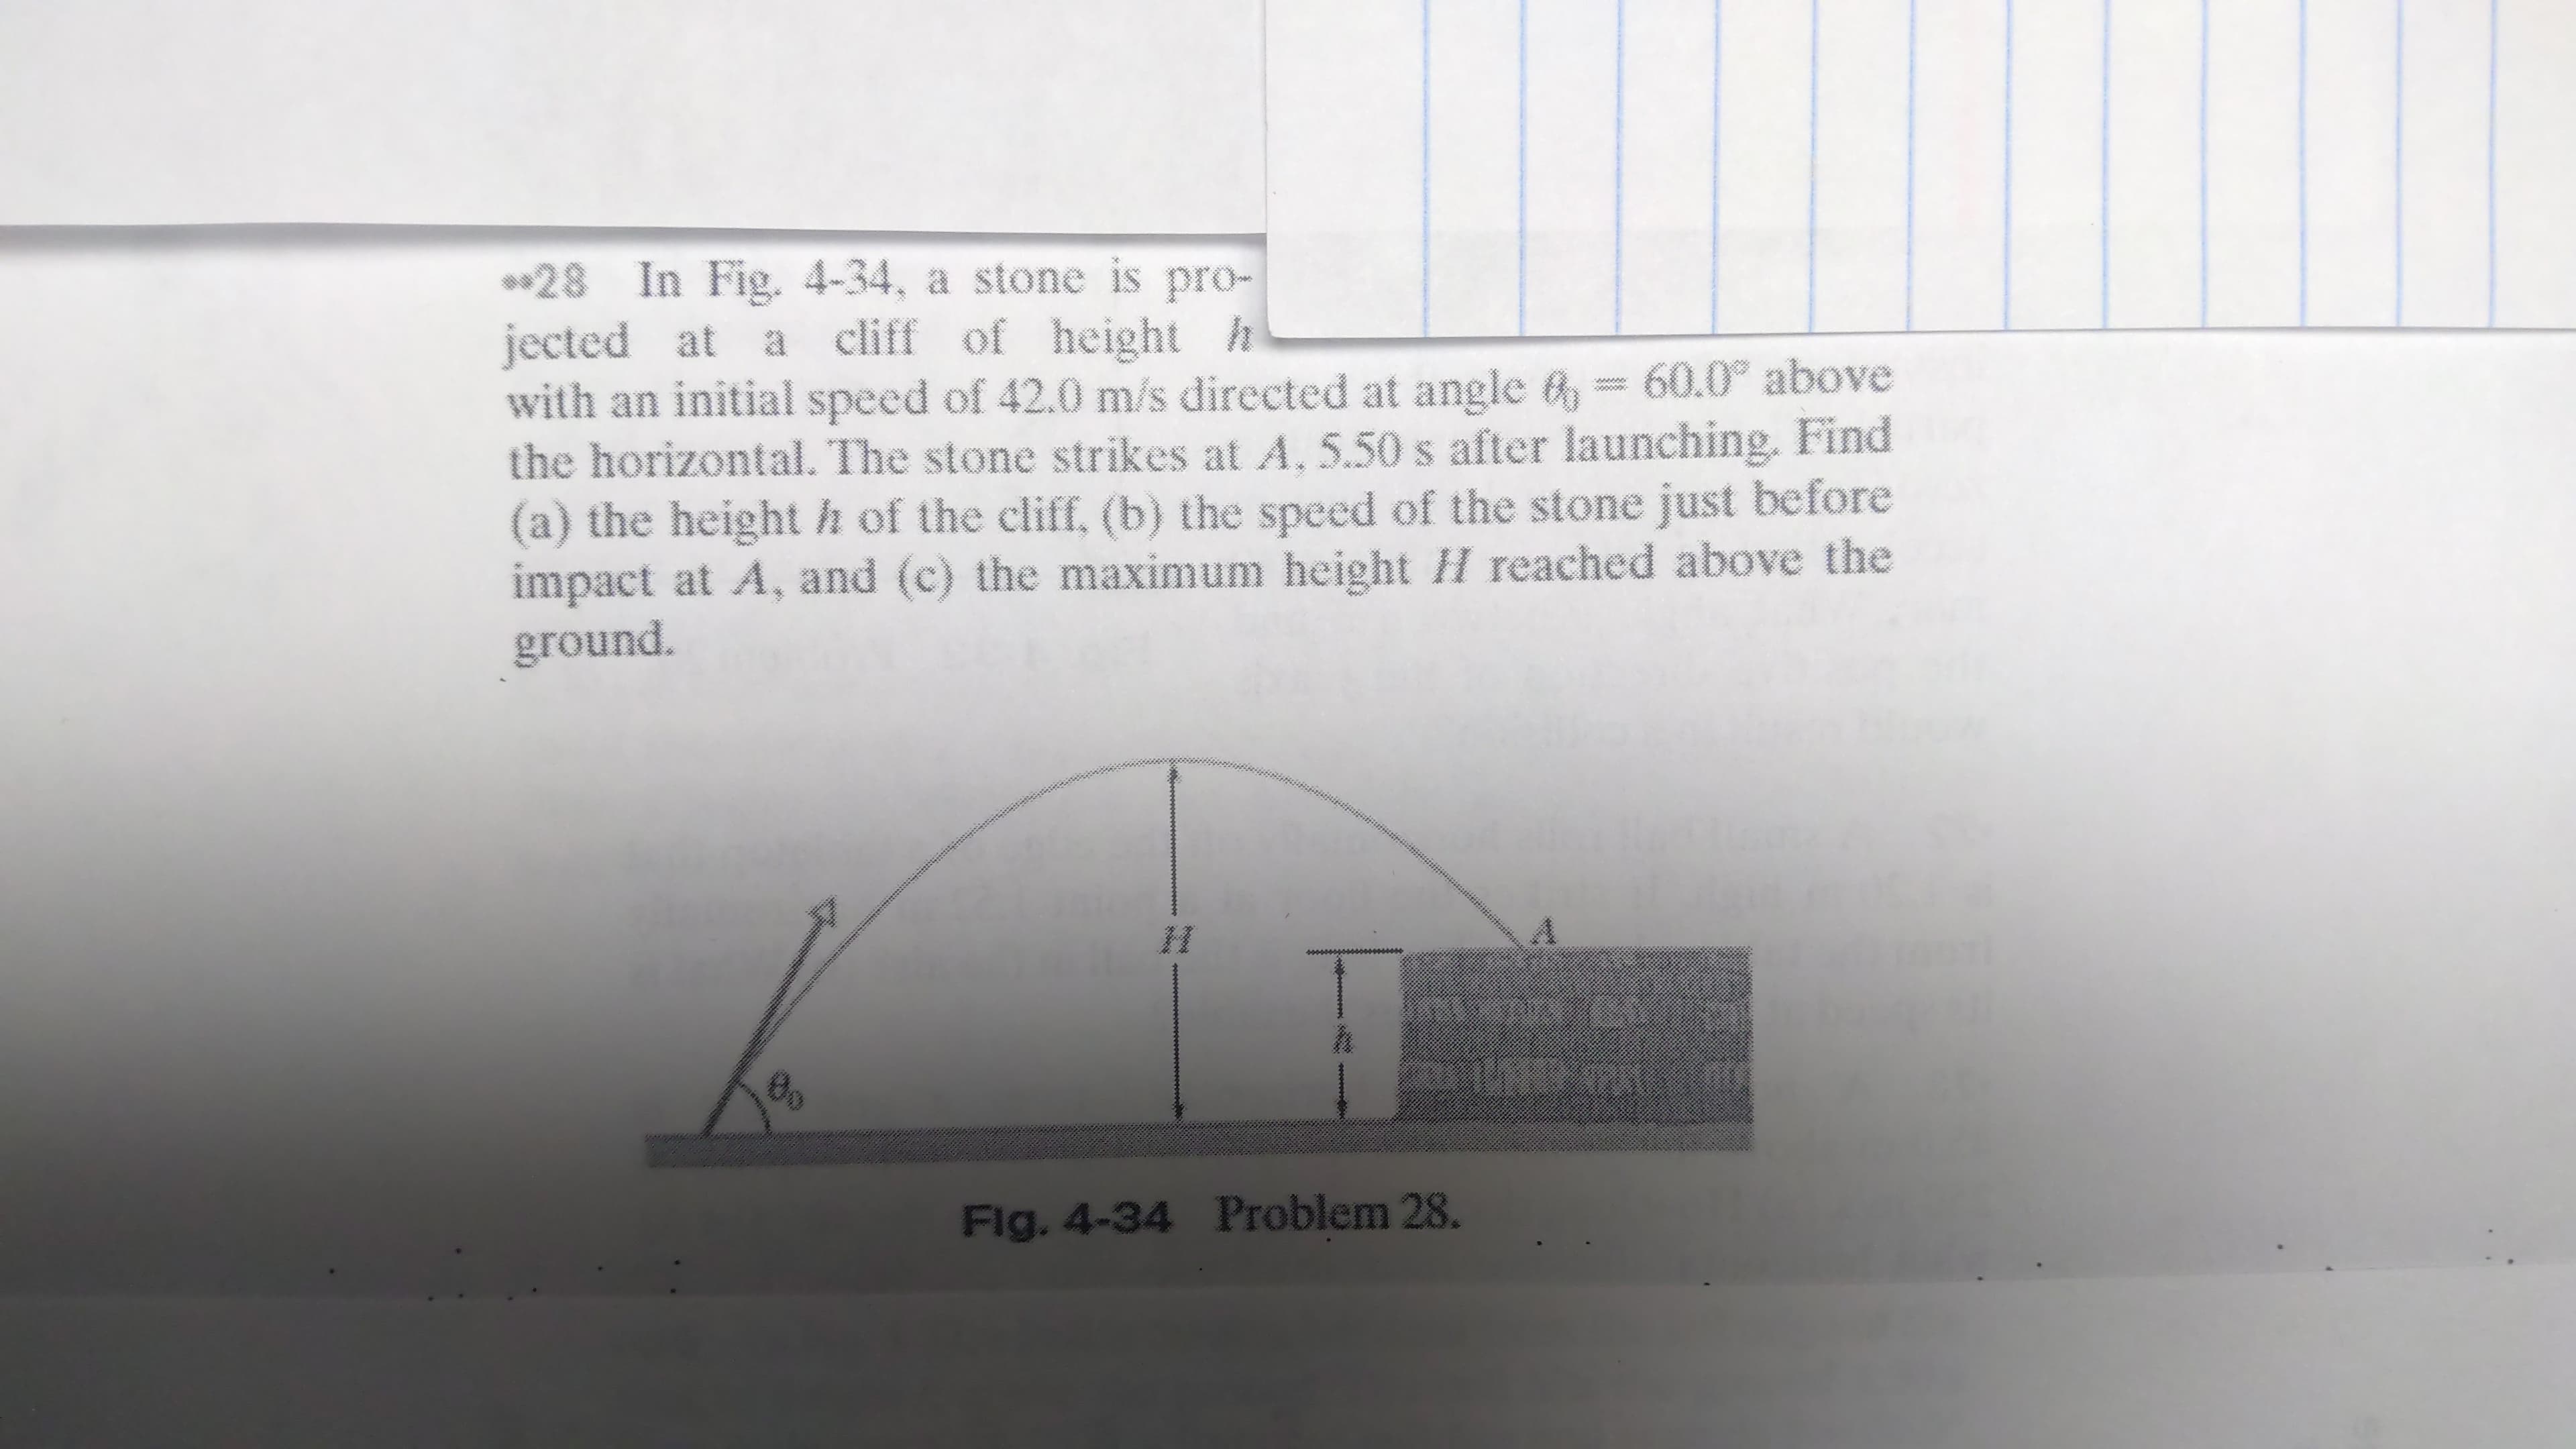 **28 In Fig. 4-34, a stone is pro-
jected at a cliff of height h
with an initial speed of 42.0 m/s directed at angle 6, = 60.0° above
the horizontal. The stone strikes at A. 5.50 s after launching. Find
(a) the heighth of the cliff, (b) the speed of the stone just before
impact at A, and (c) the maximum height H reached above the
ground.
ww.
Flg. 4-34 Problem 28.
్వతి
